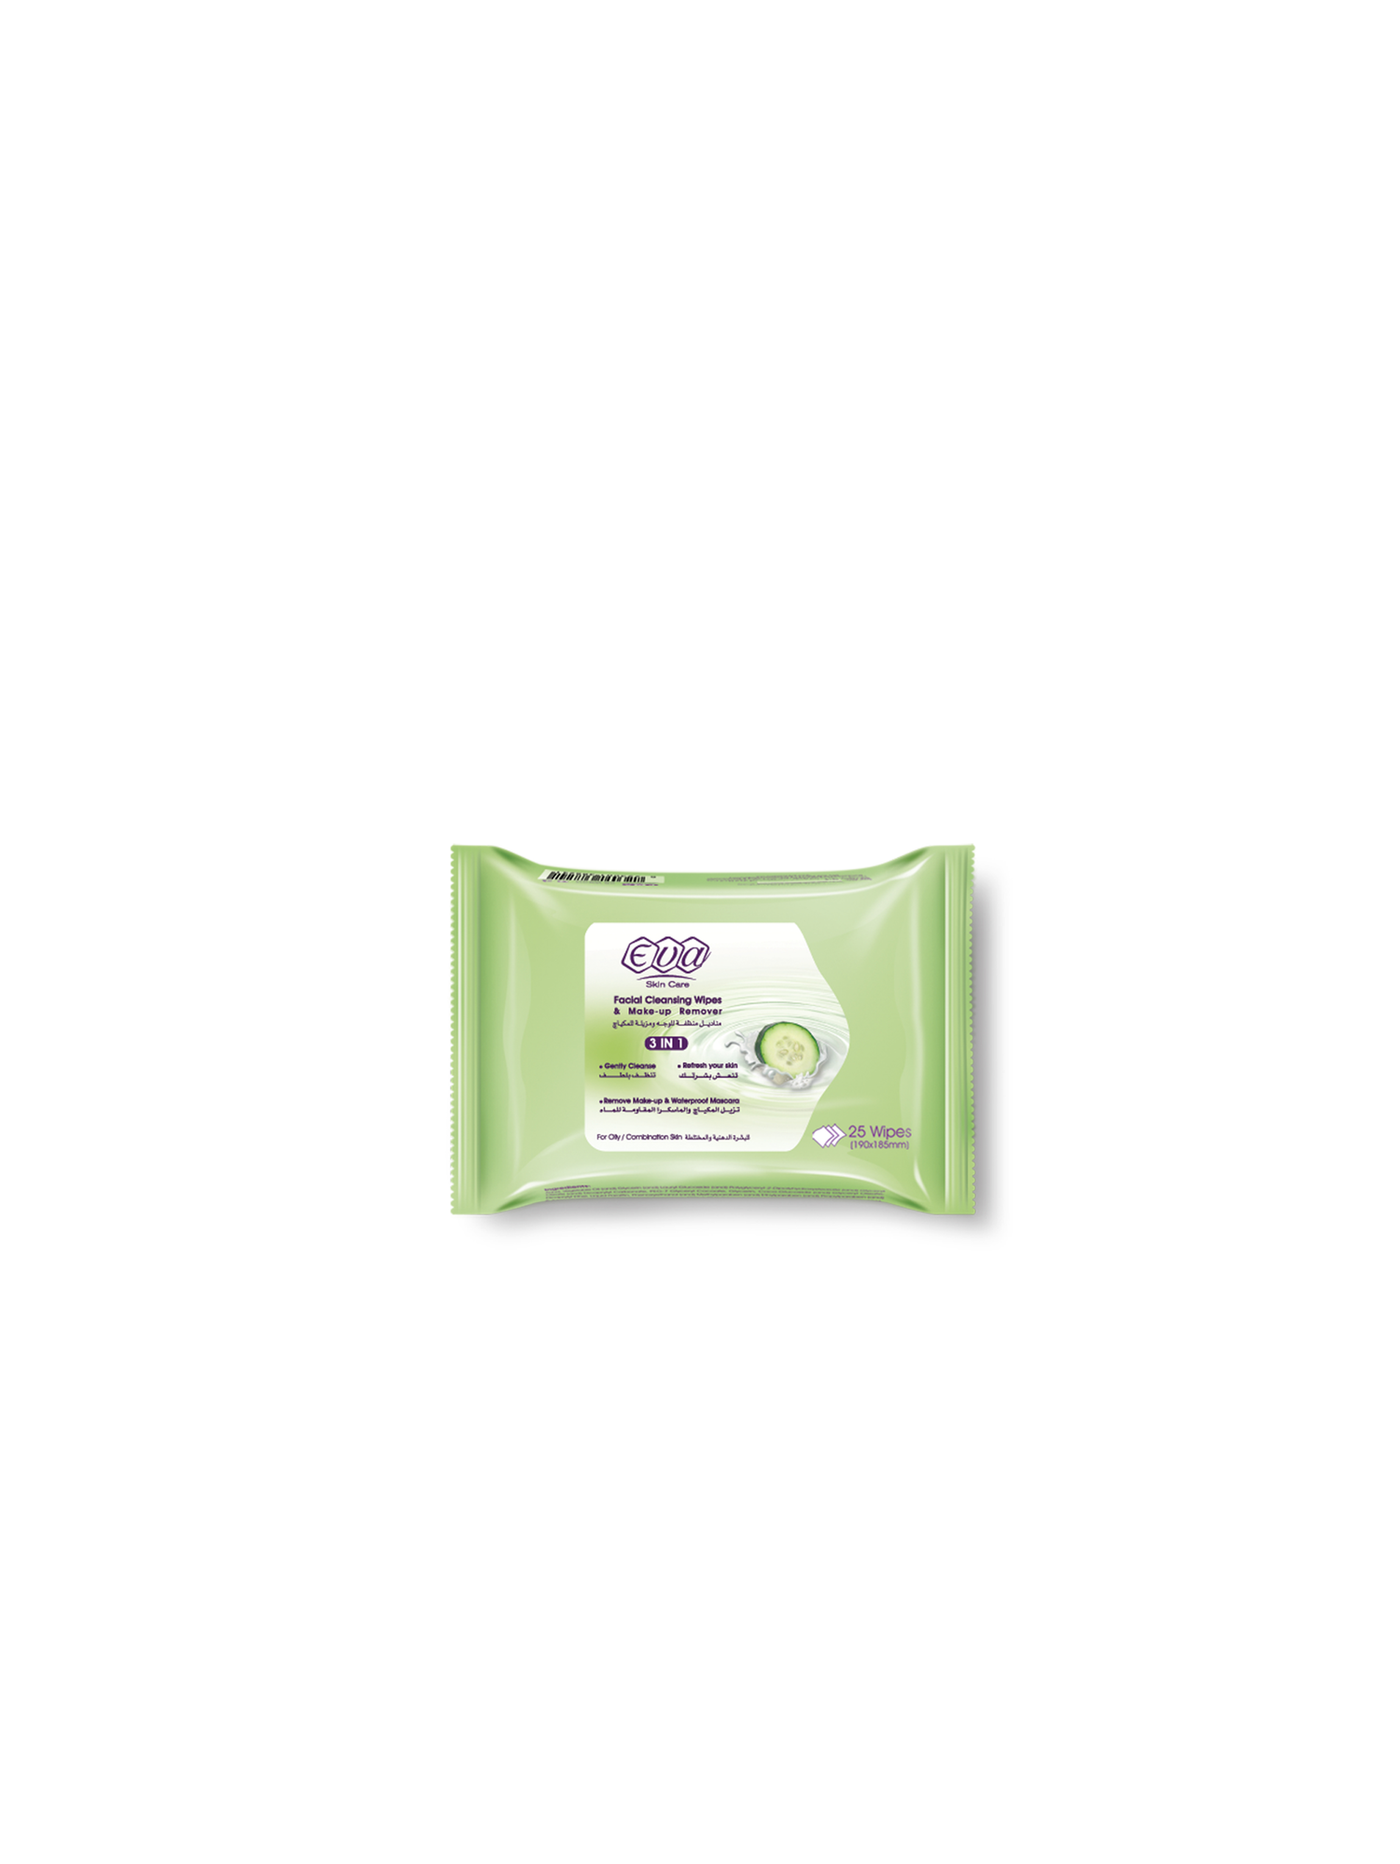 Cleansing and Make-up Removing Facial Wipes With Yoghurt And Cucumber For Oily/ Combination Skin: 25 wipes per pack